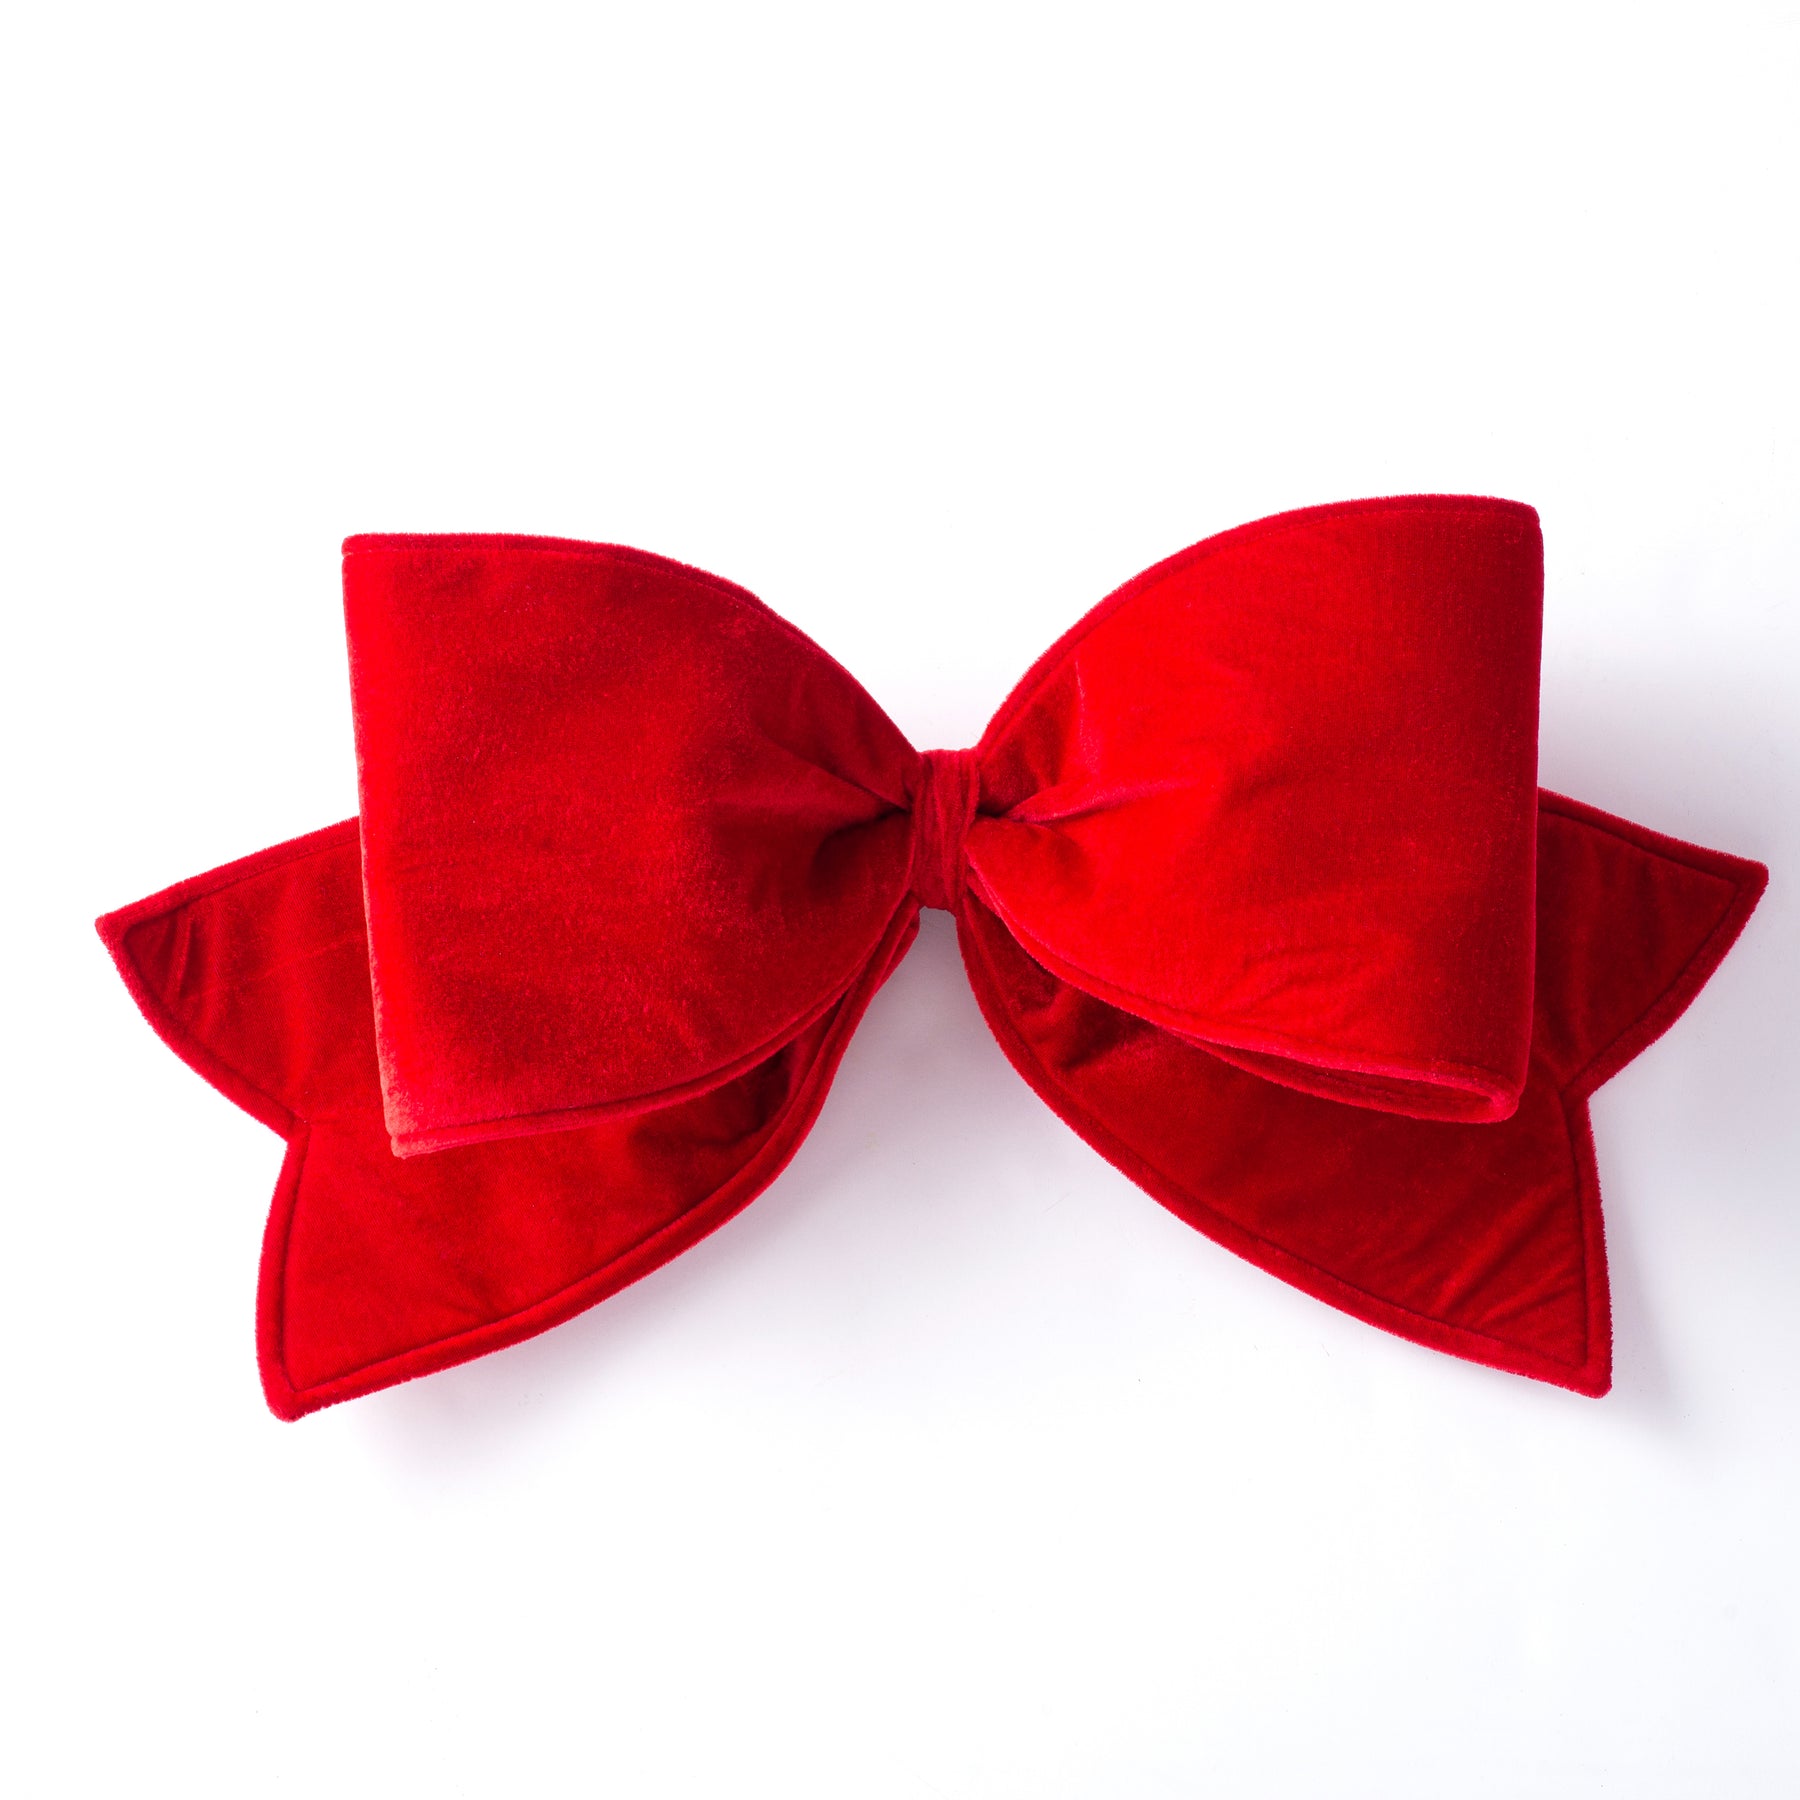 TT Wholesale Trading Sdn Bhd - Giant Ribbon Bow is available now. ⁠ Come in  2 colours which is pink and red Ribbon Size: 80x110cm⁠ ⁠ Visit our physical  shop at Cheras